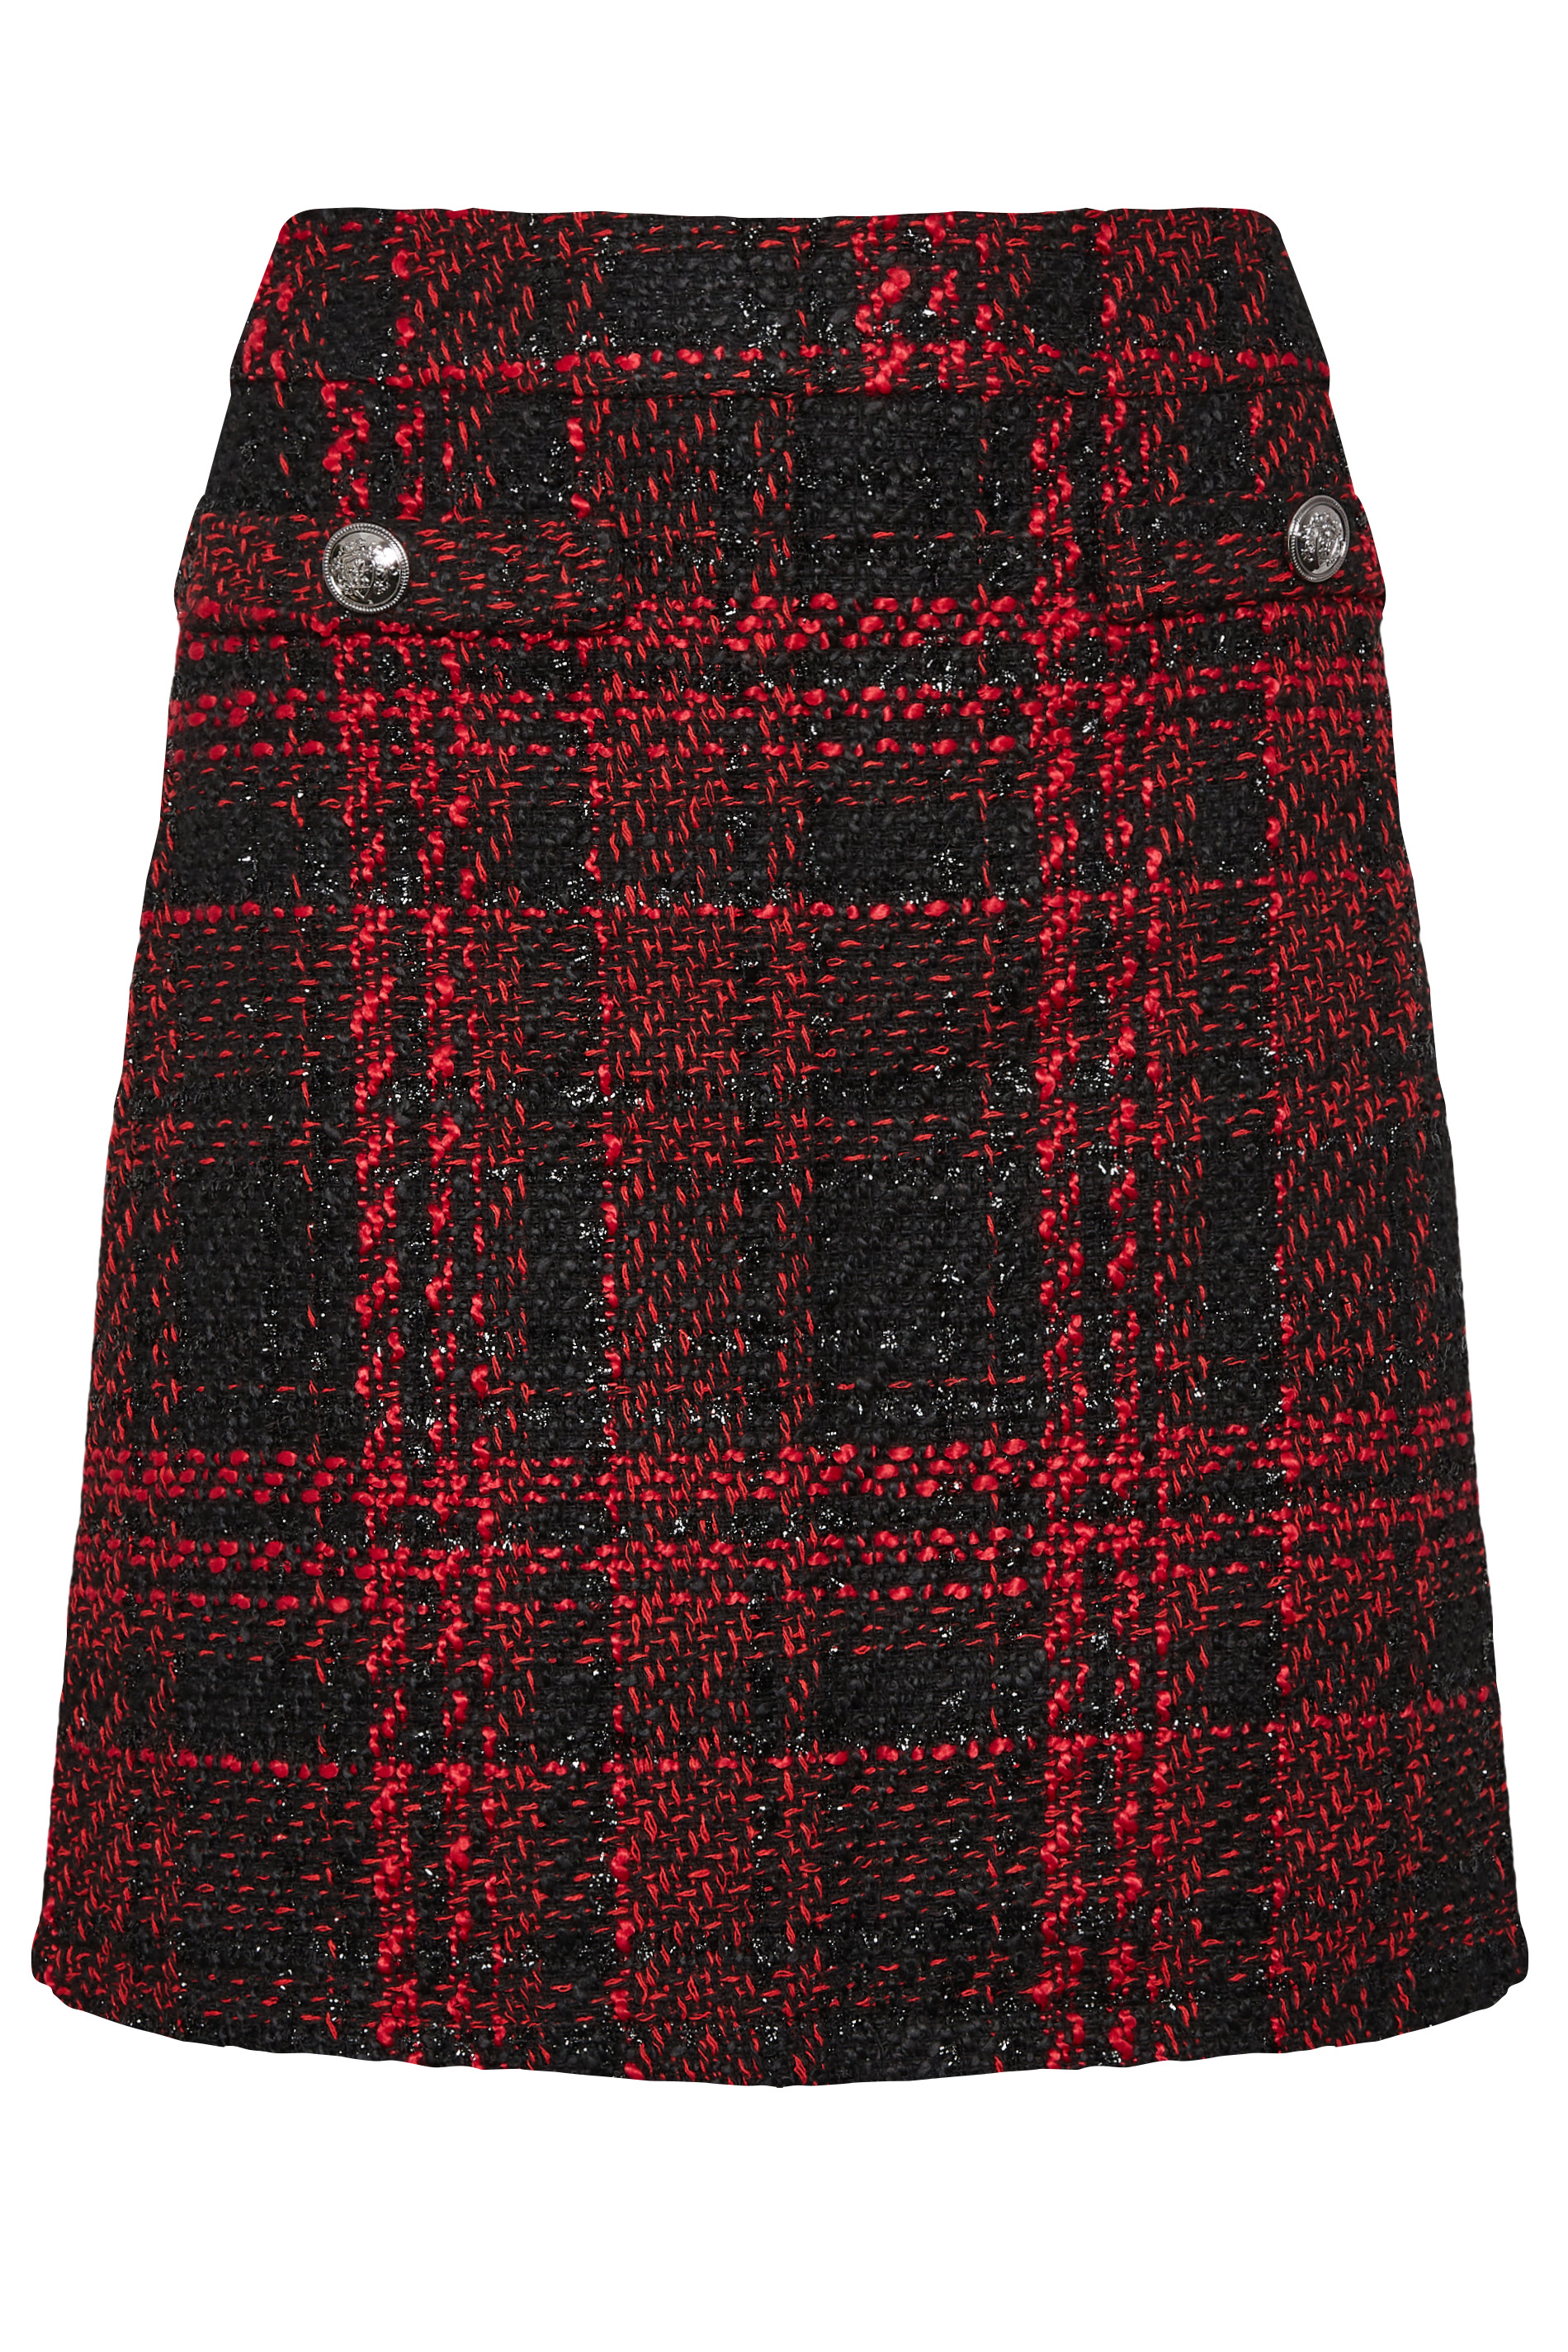 M&Co Red Check Boucle Mini Skirt | M&Co